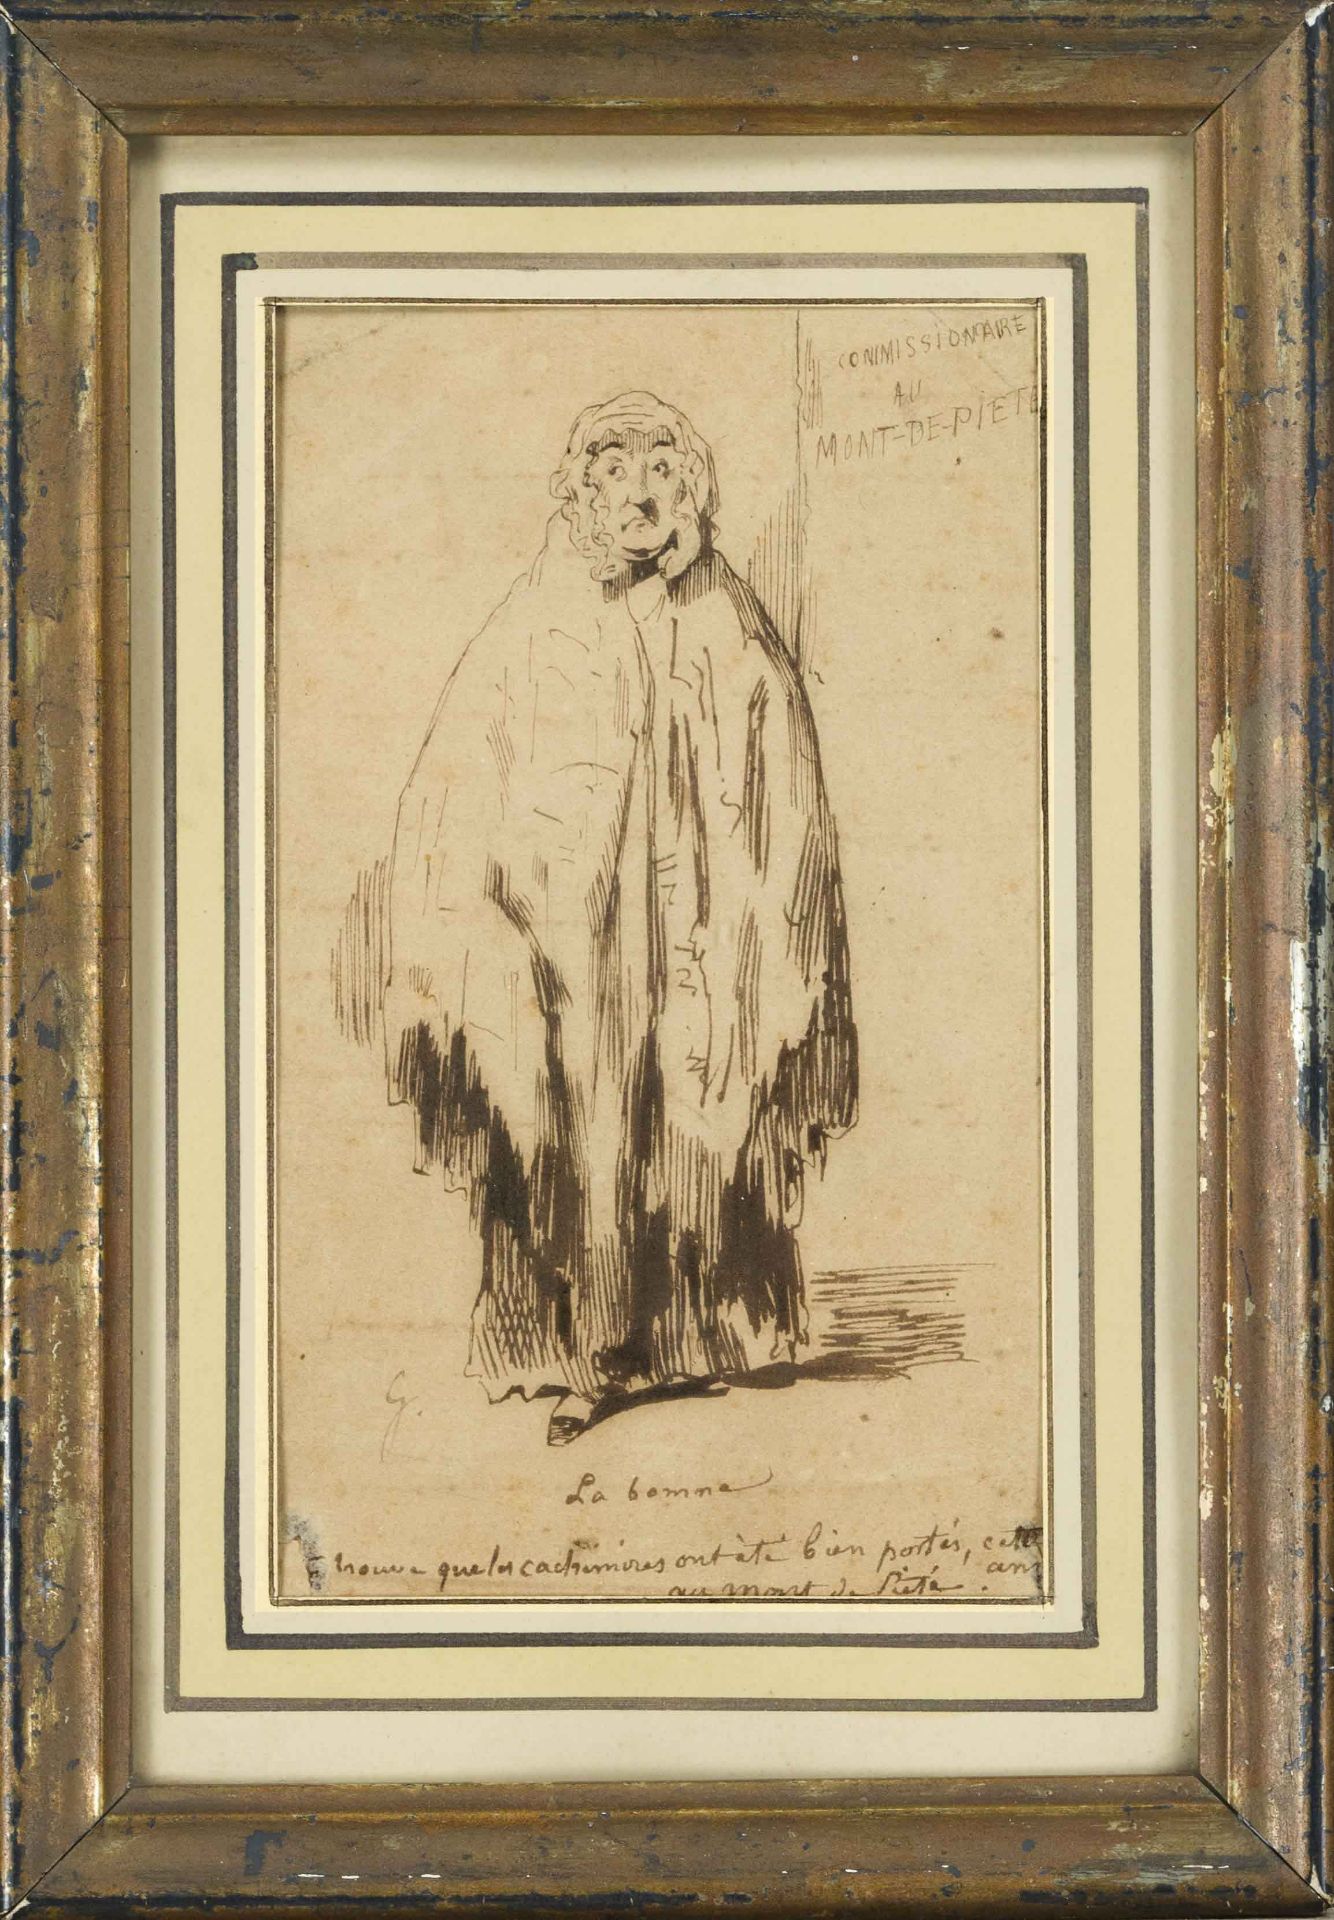 Paul Gavarni (1804-1866), next to Honoré Daumier the most important French caricaturist of the